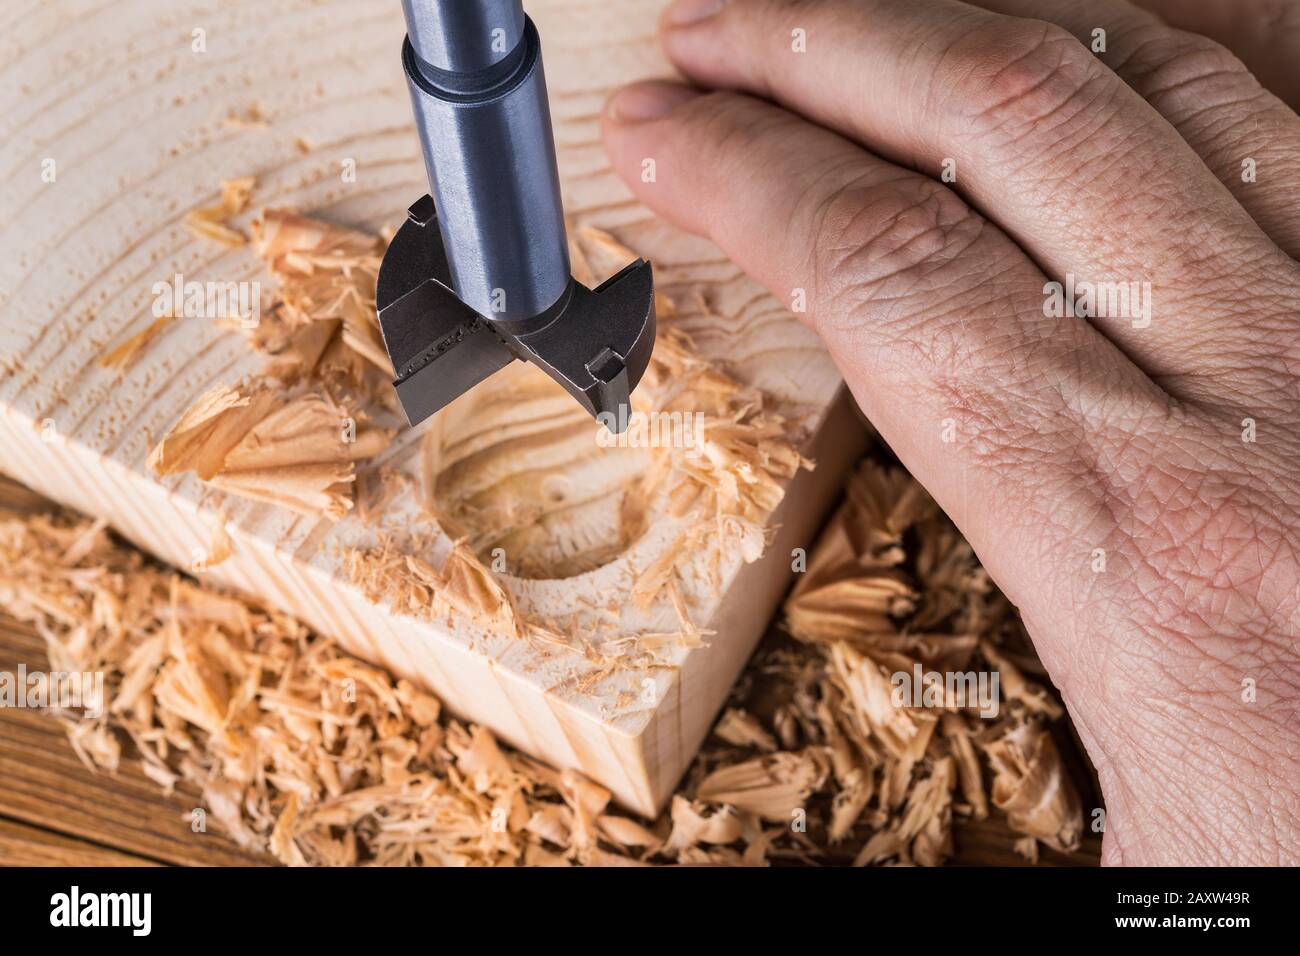 Forstner drill bit detail. Craftsman boring cylindric hole into wood. Hand of joiner on wooden plank, sharp steel cutting tool and scattered shavings. Stock Photo